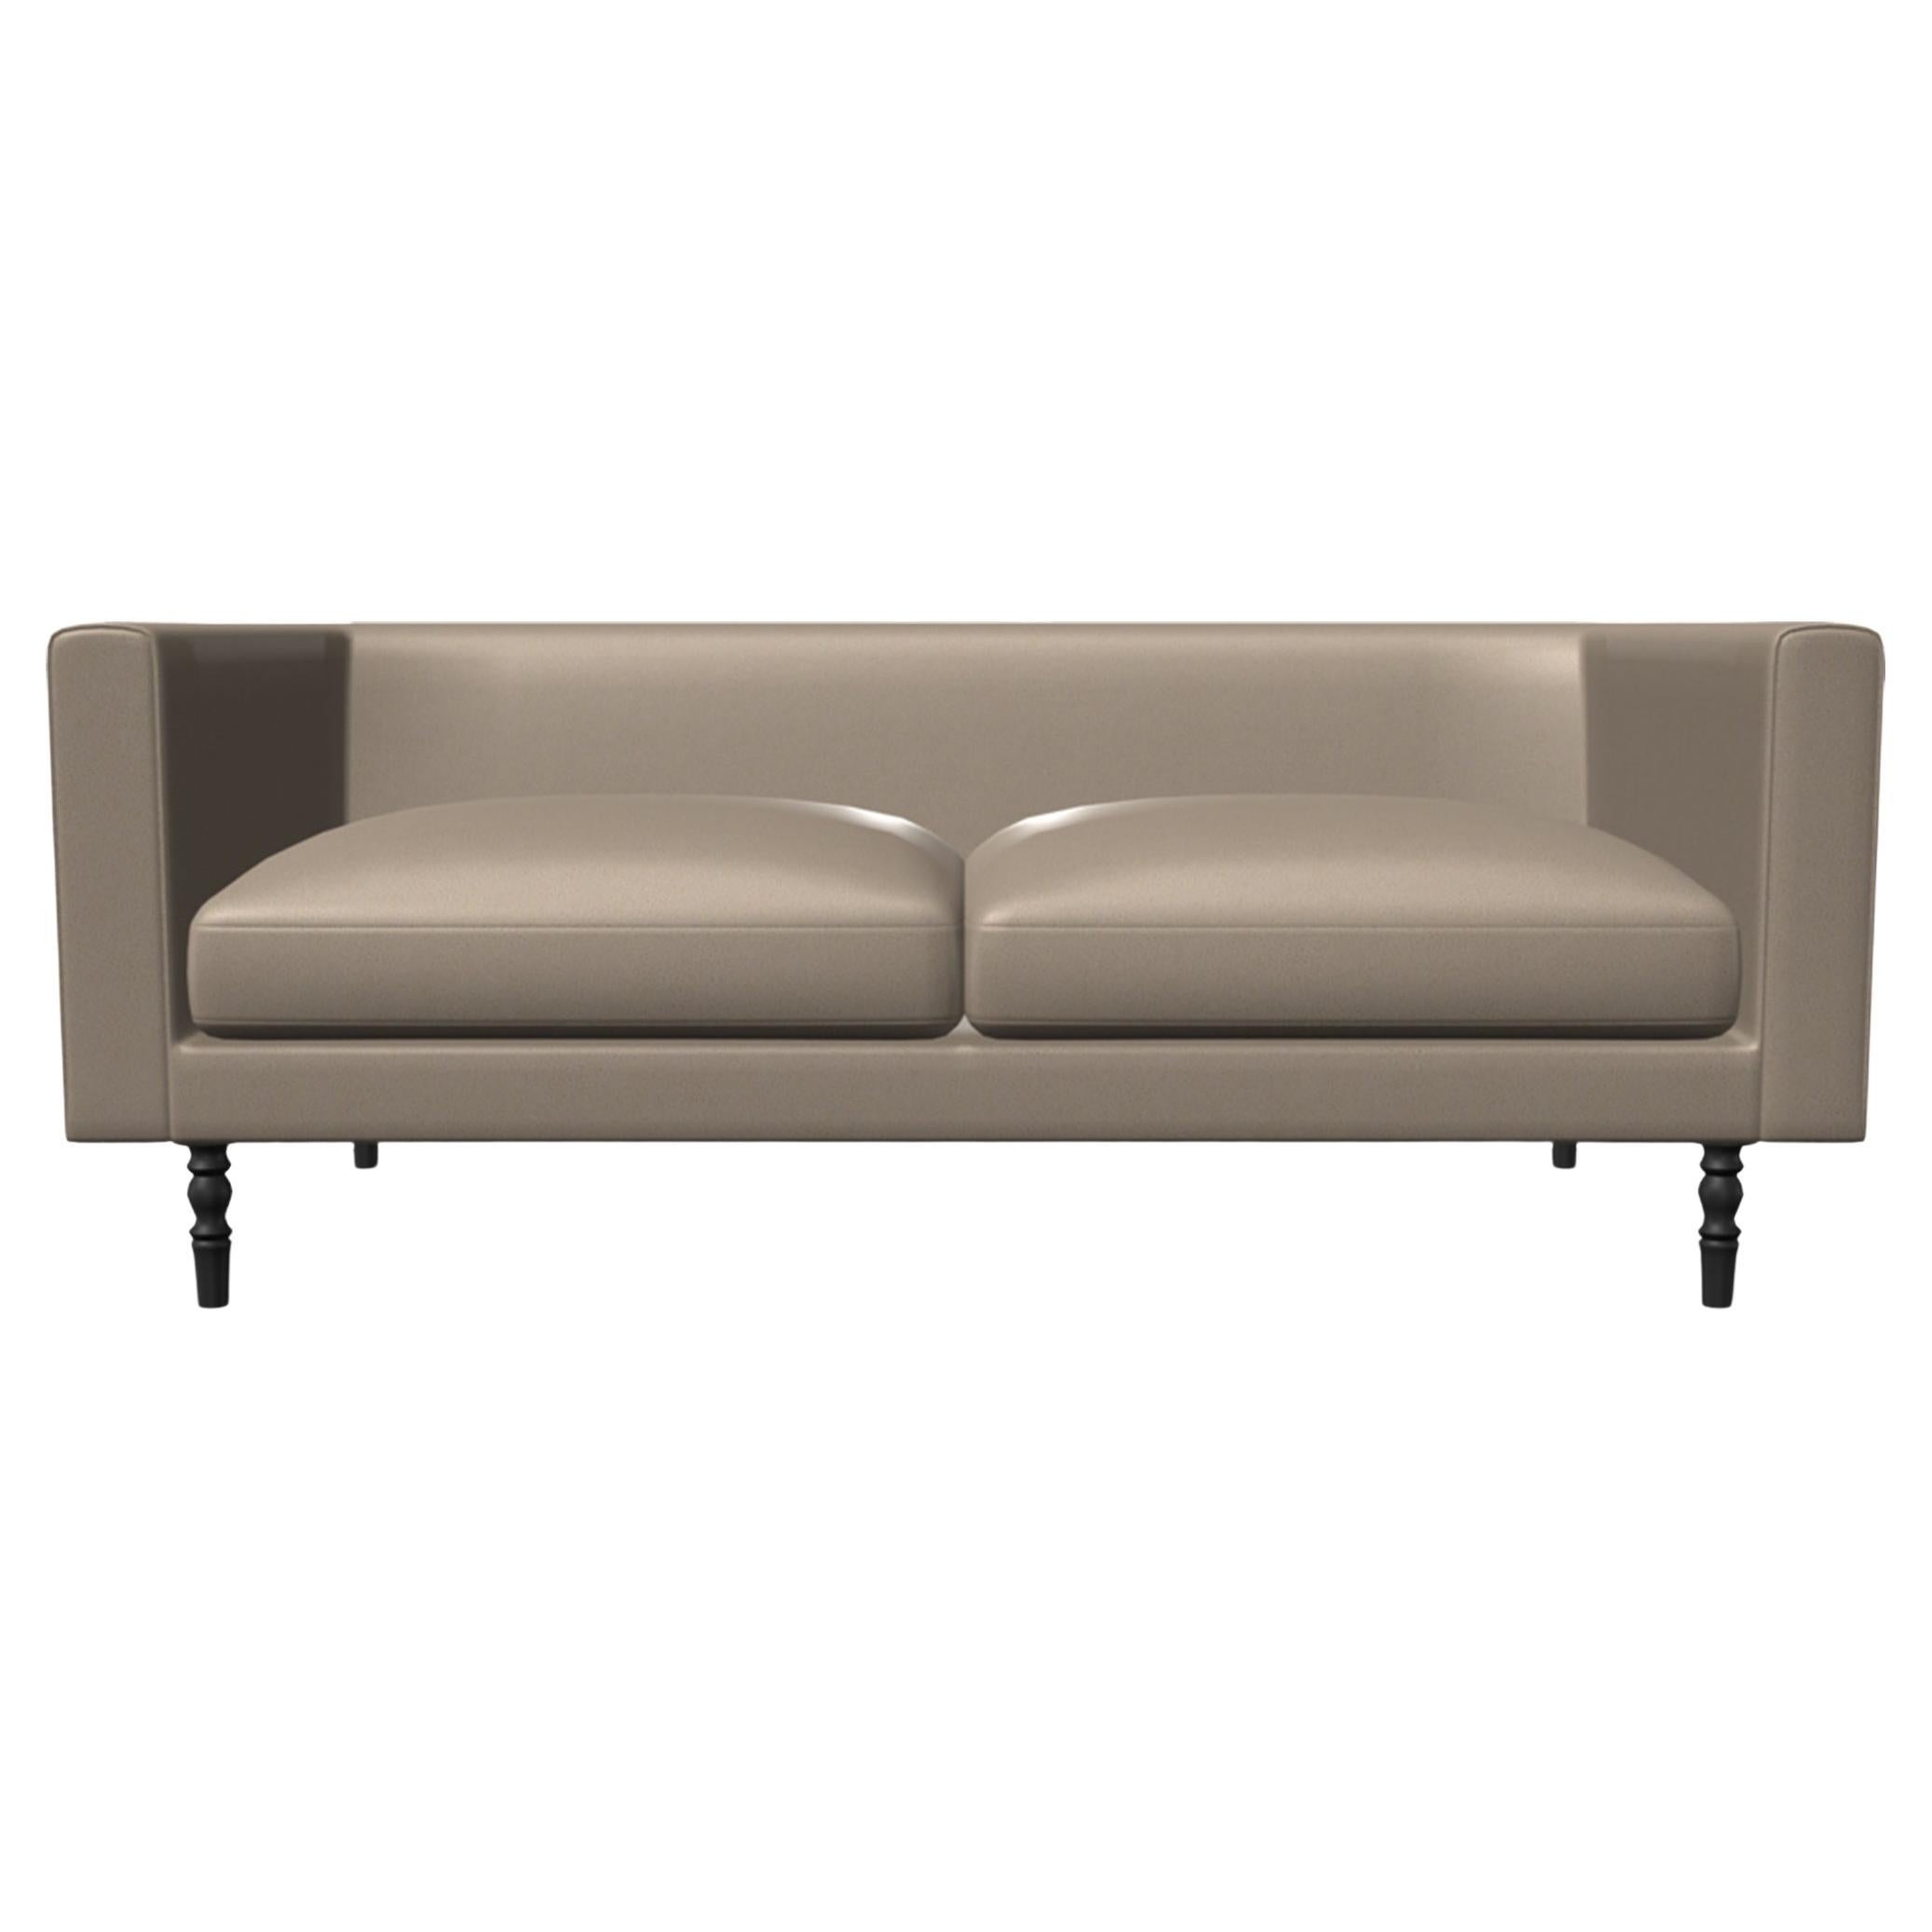 Moooi Boutique 2-Seat Sofa in Spectrum Mineral 30160 Upholstery with Pawn Legs For Sale